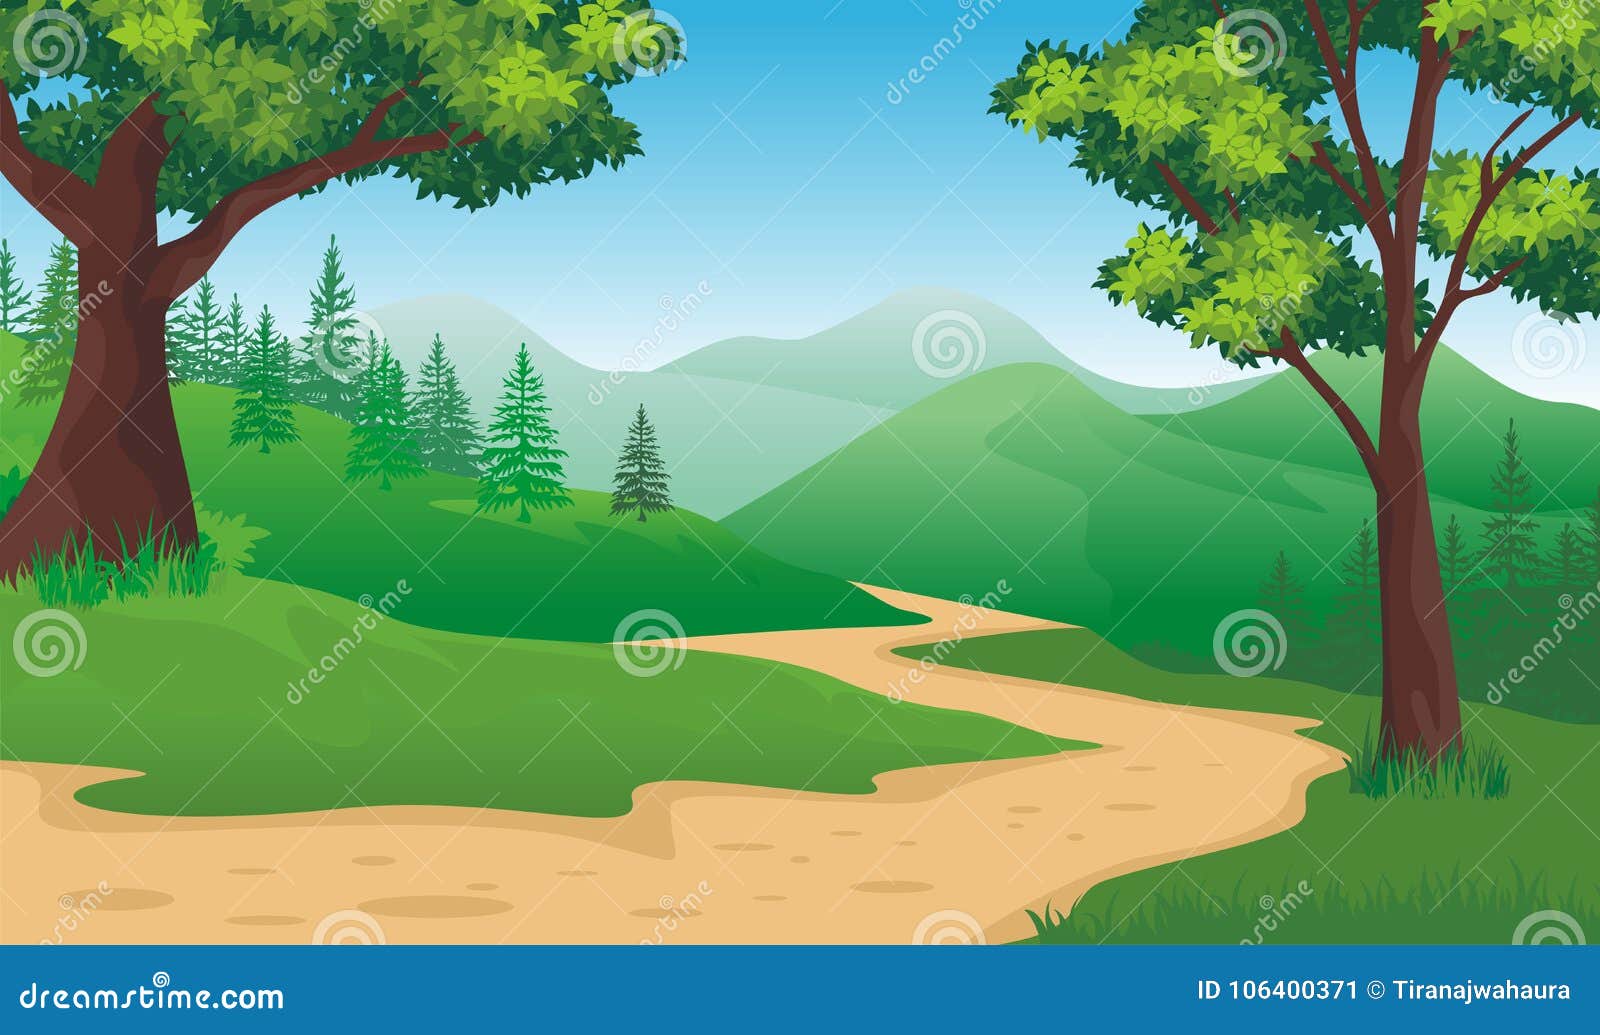 cartoon nature landscape path over the mountains